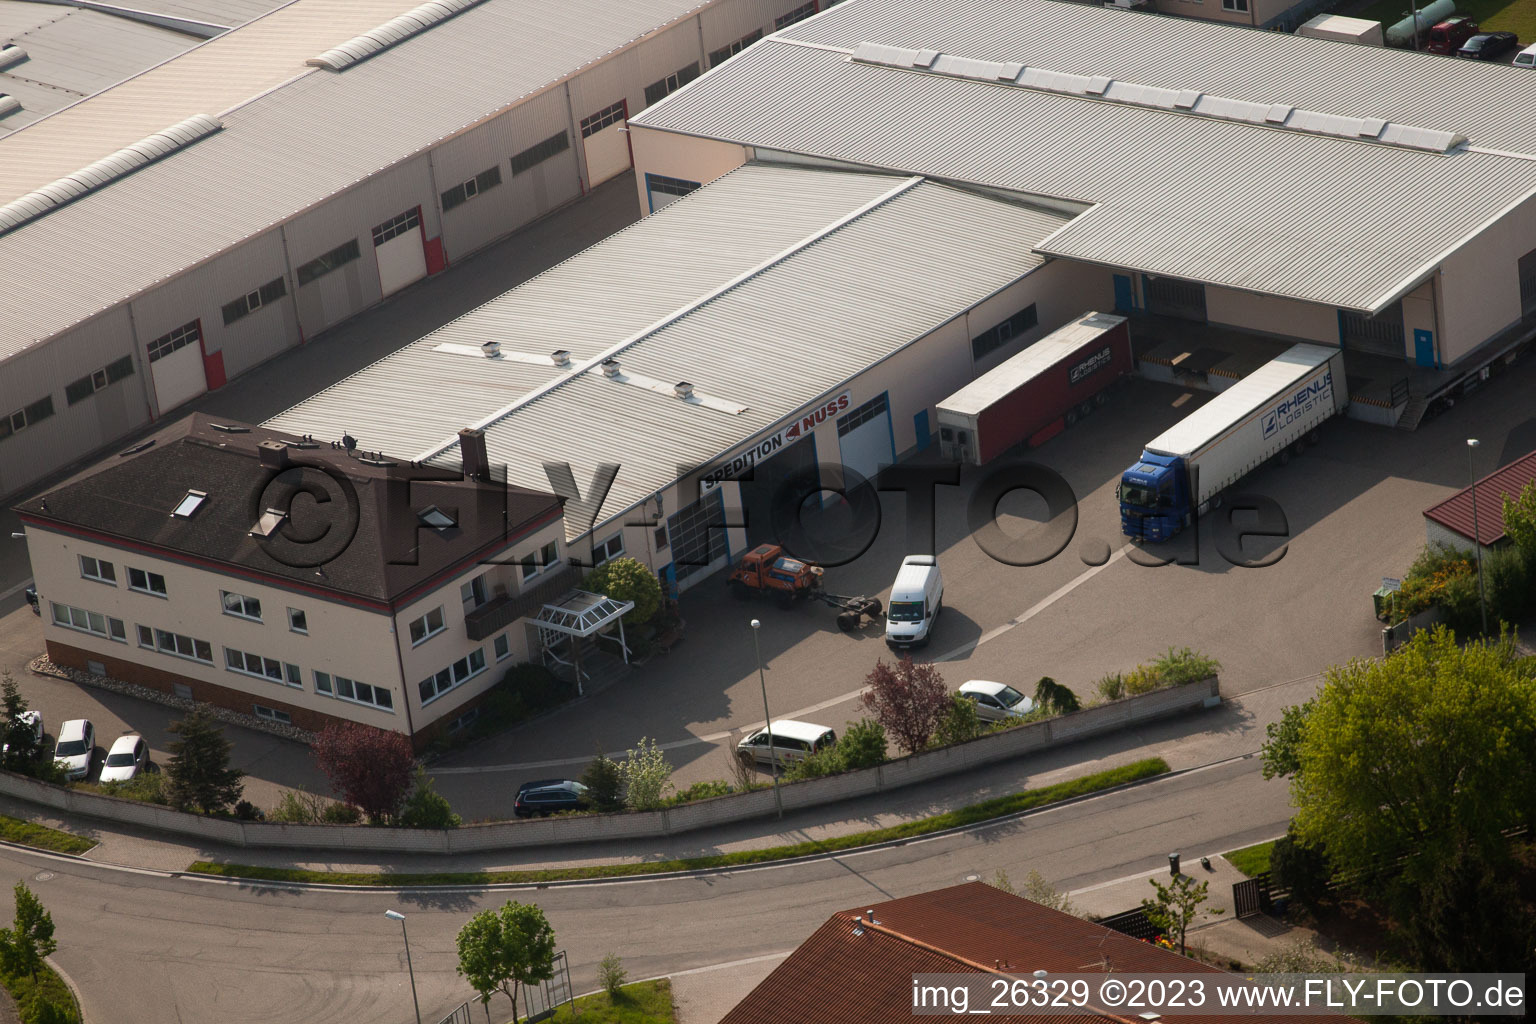 Freight forwarding company Nuss in the Horst industrial area in the district Minderslachen in Kandel in the state Rhineland-Palatinate, Germany